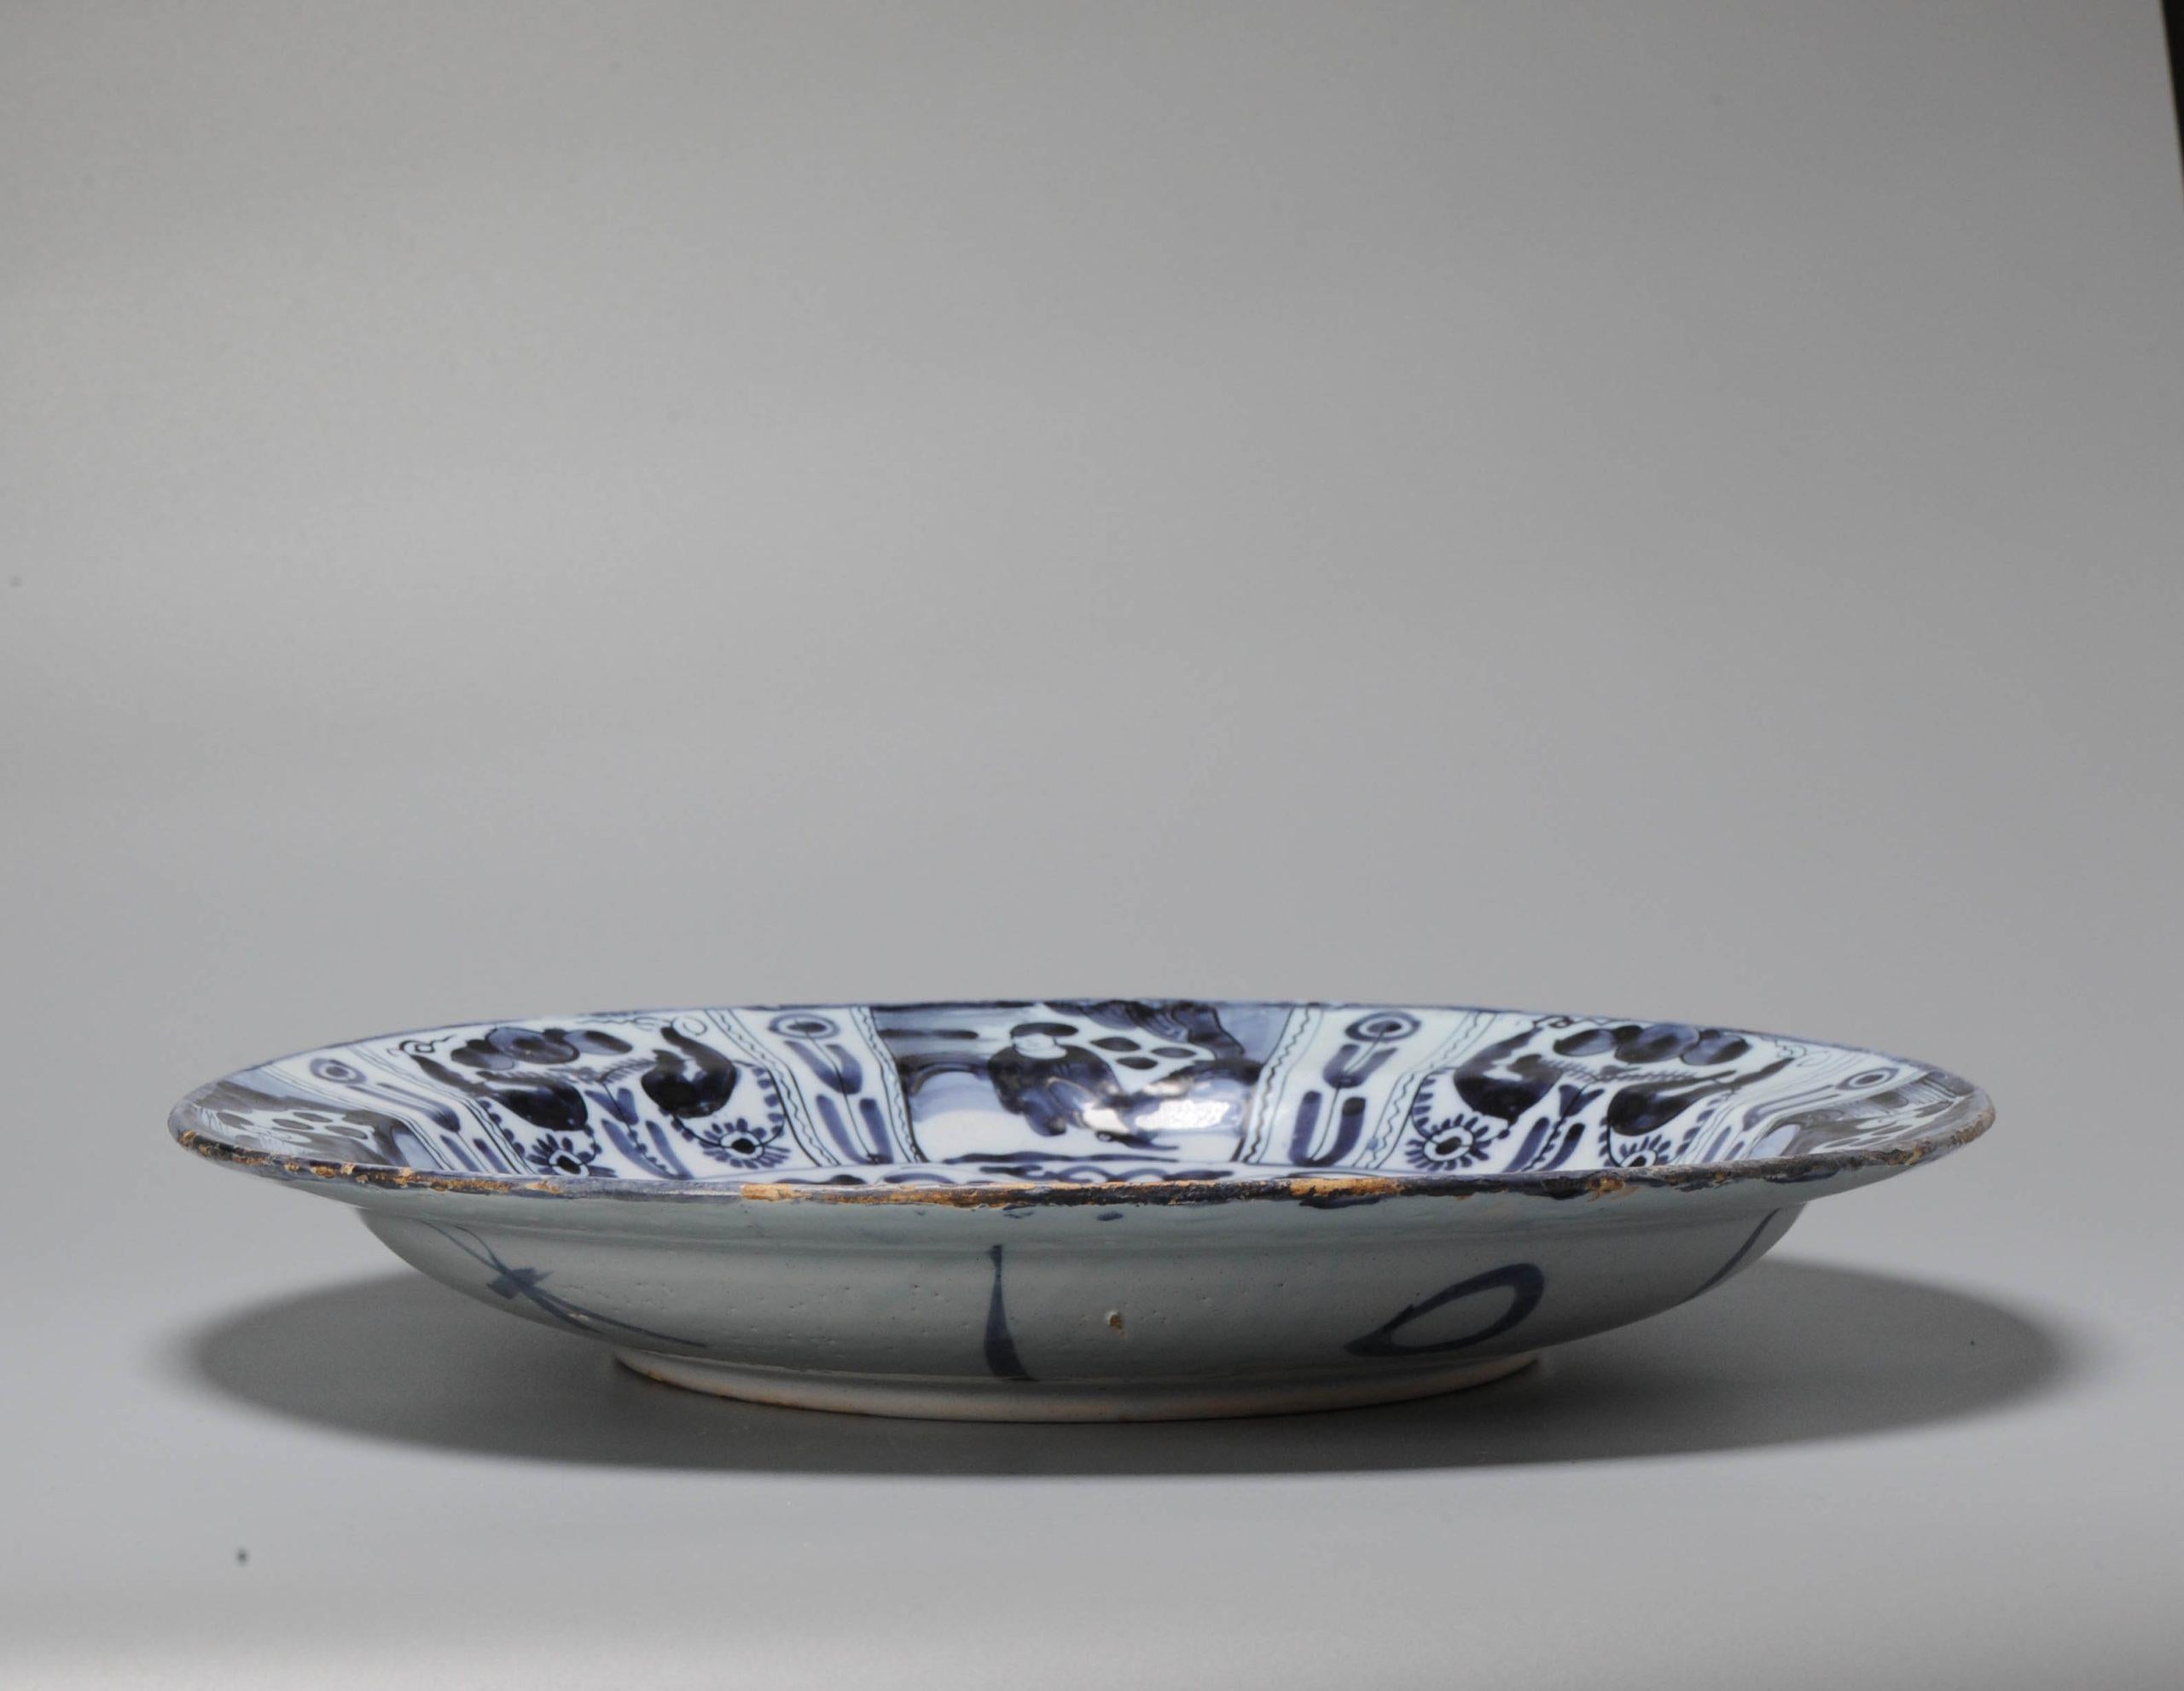 Earthenware dish on footring. flat rim. Decorated in different shades of blue on a white tin glaze in Chinese Transitional style with the so called 'Lion of Juda' in a garden landscape. Flower scrolls replace the diaper motif as a border around the